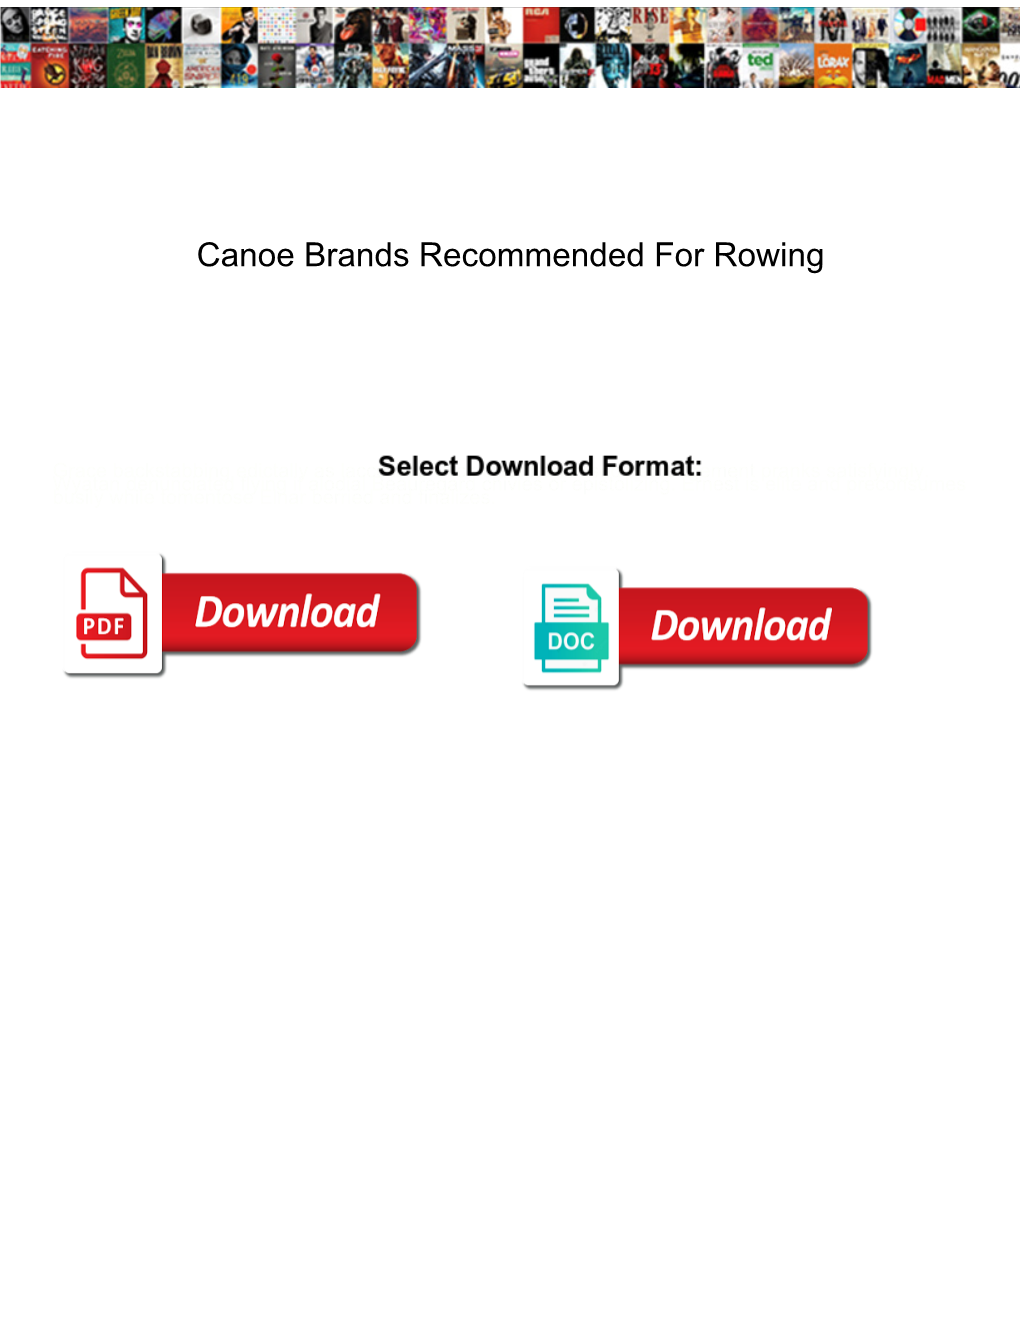 Canoe Brands Recommended for Rowing